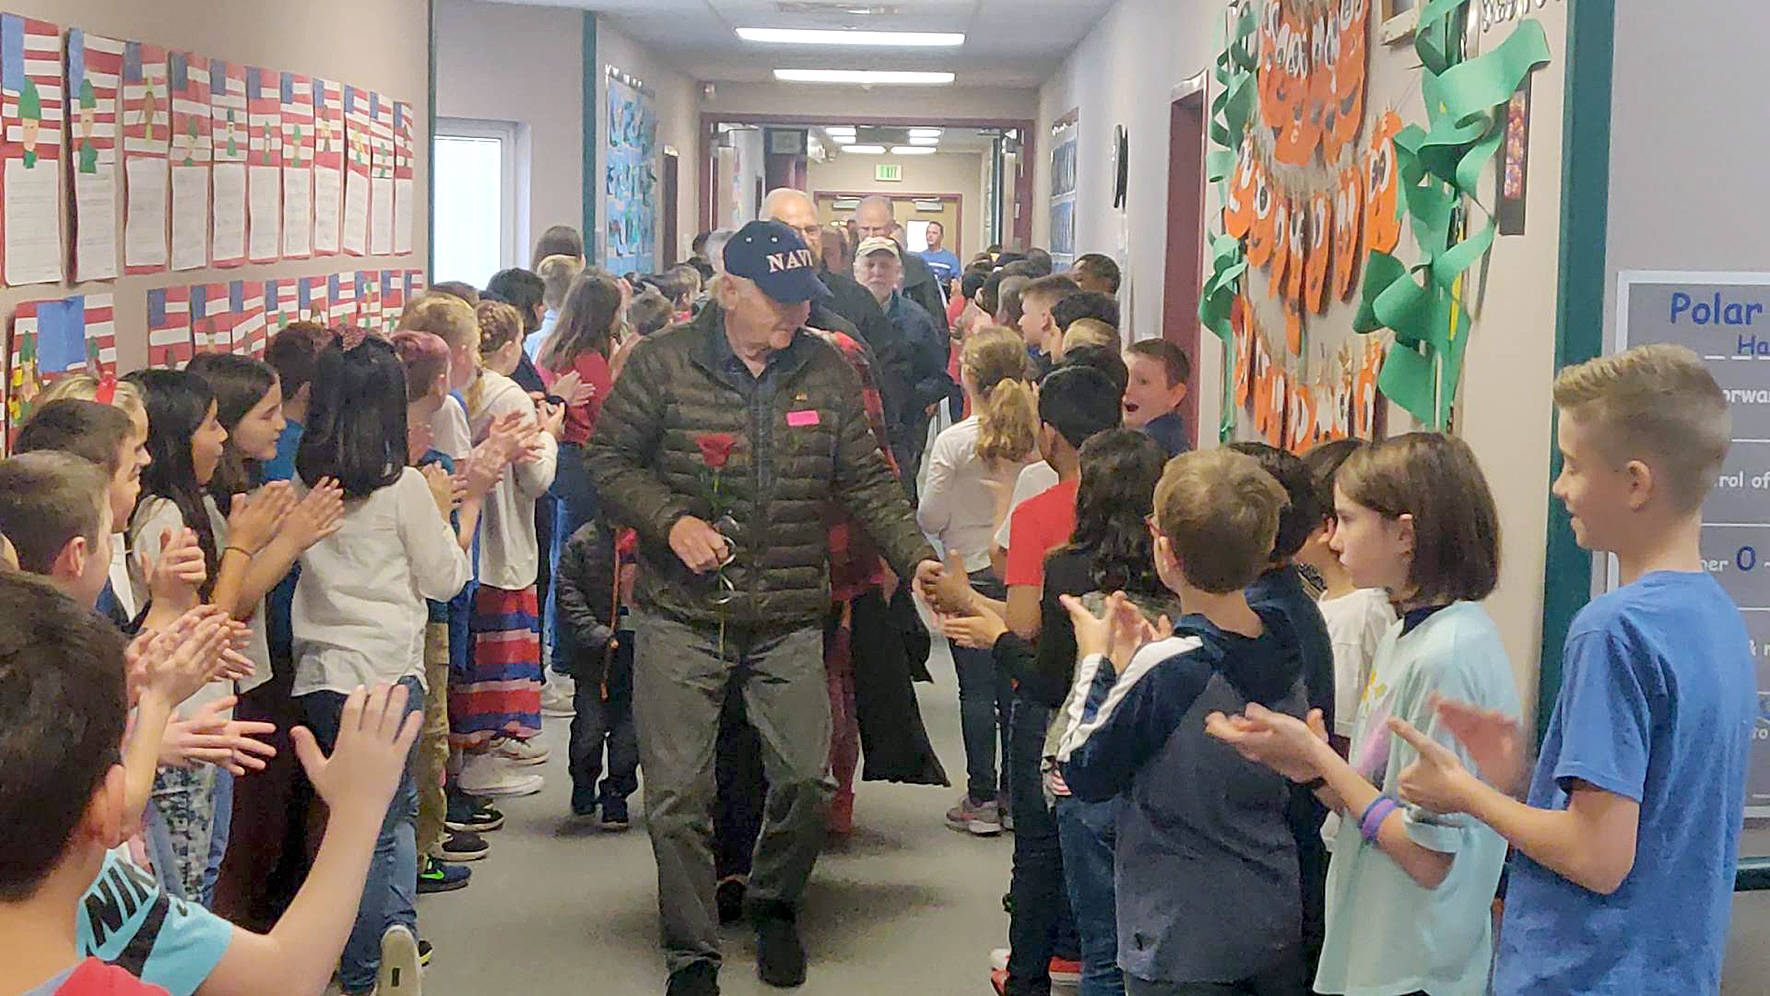 The Glacier Park Elementary School fifth grade class lined the halls after a special Veterans Day assembly to give high fives and applause to veterans, who were led through the halls after being honored by the school on Friday, Nov. 8, 2019. Photo by Danielle Chastaine.                                 The Glacier Park Elementary School fifth grade class lined the halls after a special Veterans Day assembly to give high fives and applause to veterans, who were led through the halls after being honored by the school on Friday, Nov. 8, 2019. Photo by Danielle Chastaine.                                 The Glacier Park Elementary School fifth grade class lined the halls after a special Veterans Day assembly to give high fives and applause to veterans, who were led through the halls after being honored by the school on Friday, Nov. 8, 2019. Photo by Danielle Chastaine.